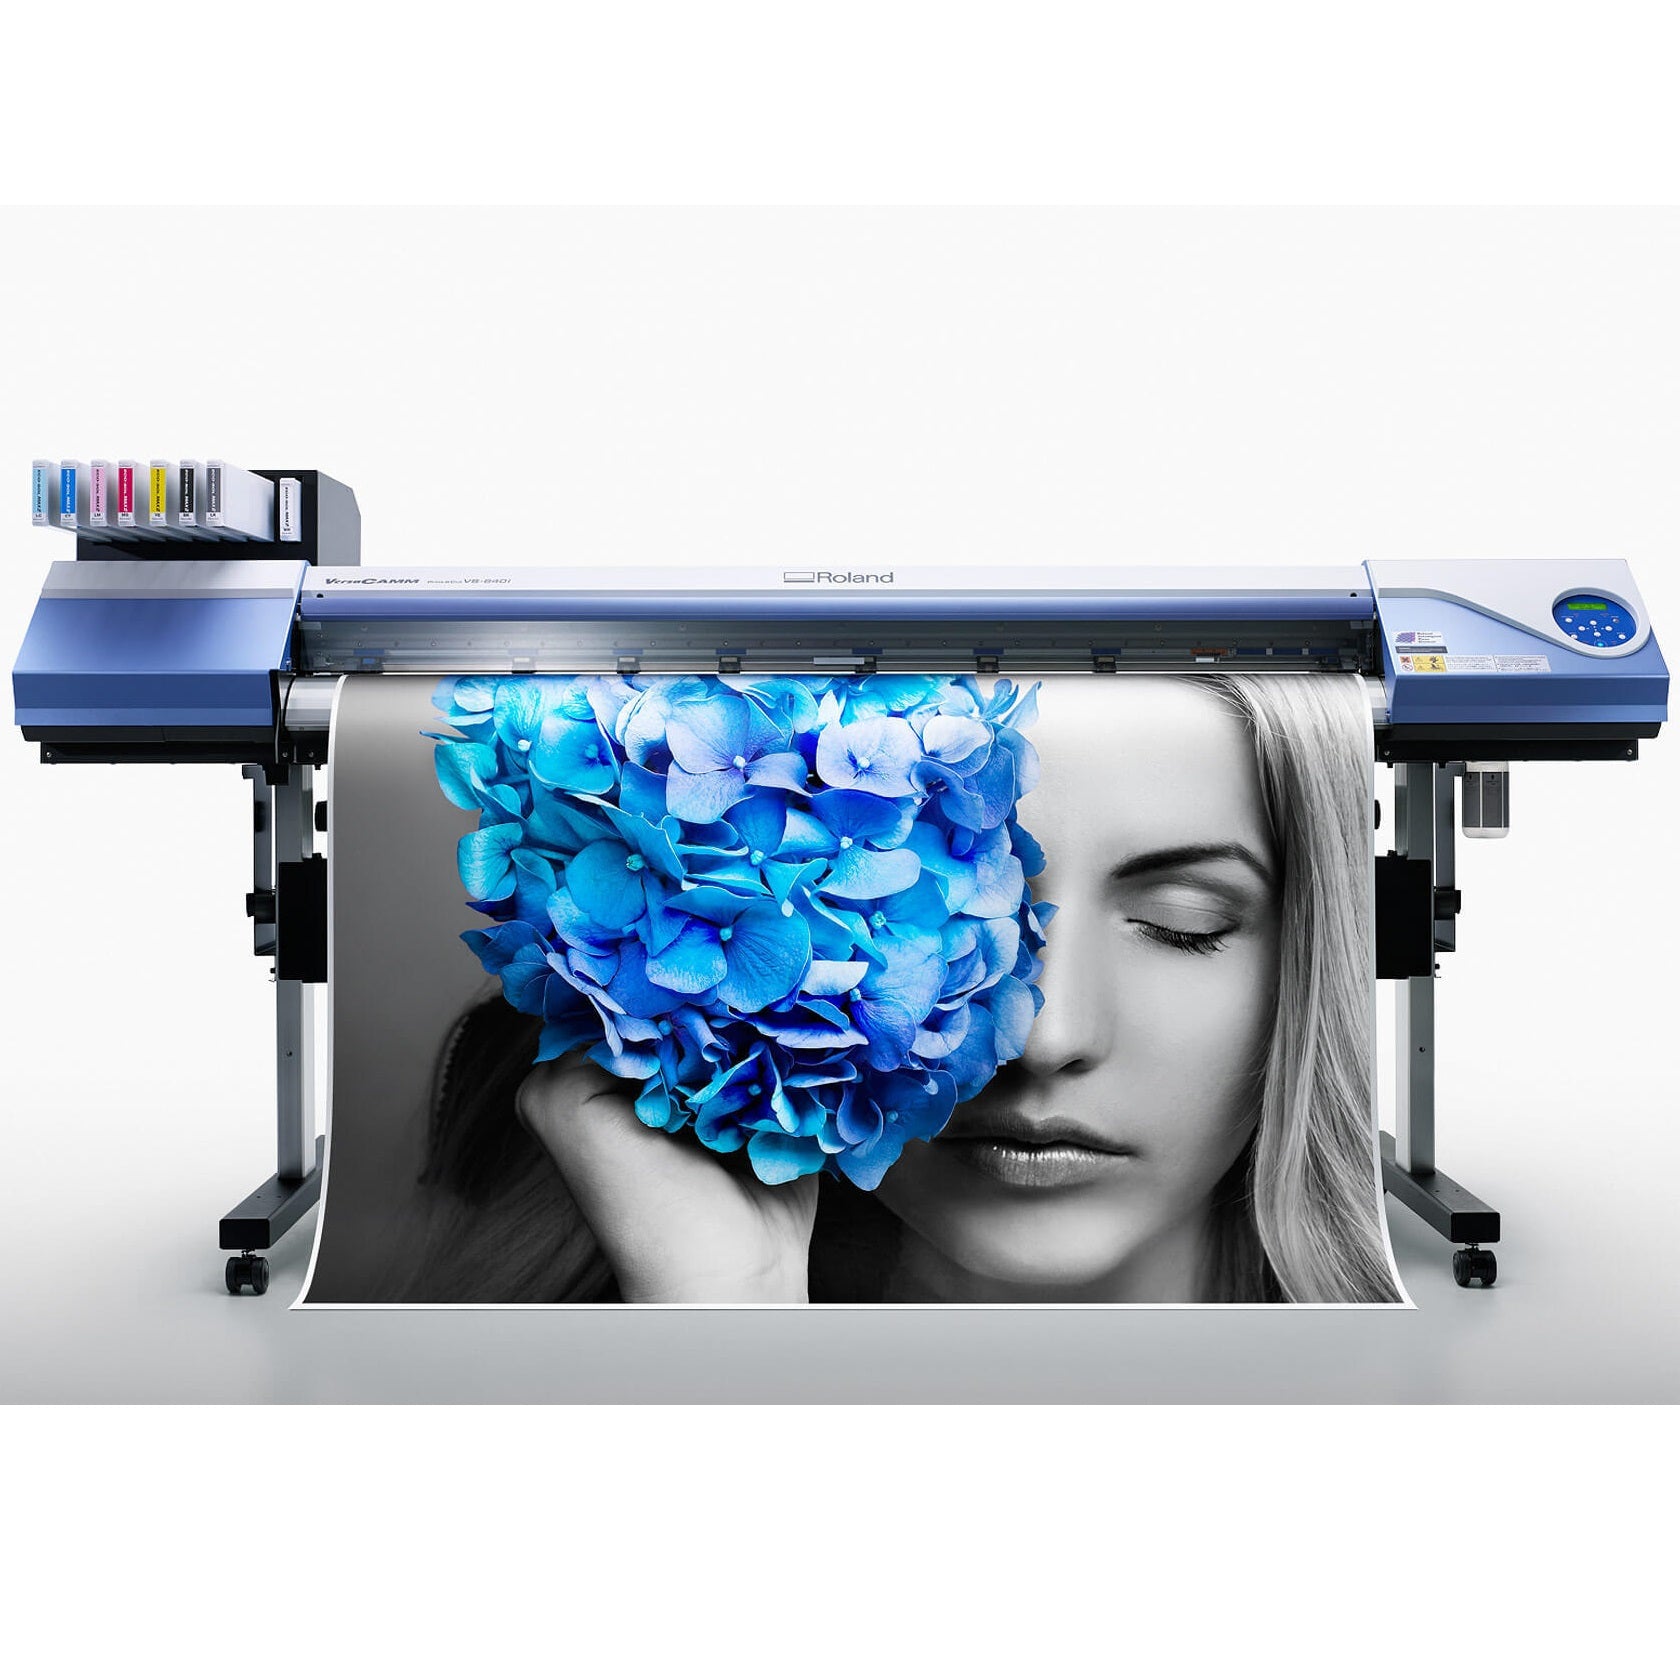 Absolute Toner $139.72/Month Roland VersaCAMM 30" VS-300i (VS300i) Large Format Inkjet Printer/Cutter (Print And Cut) With High Resolution 1440 Dpi Print and Cut Plotters